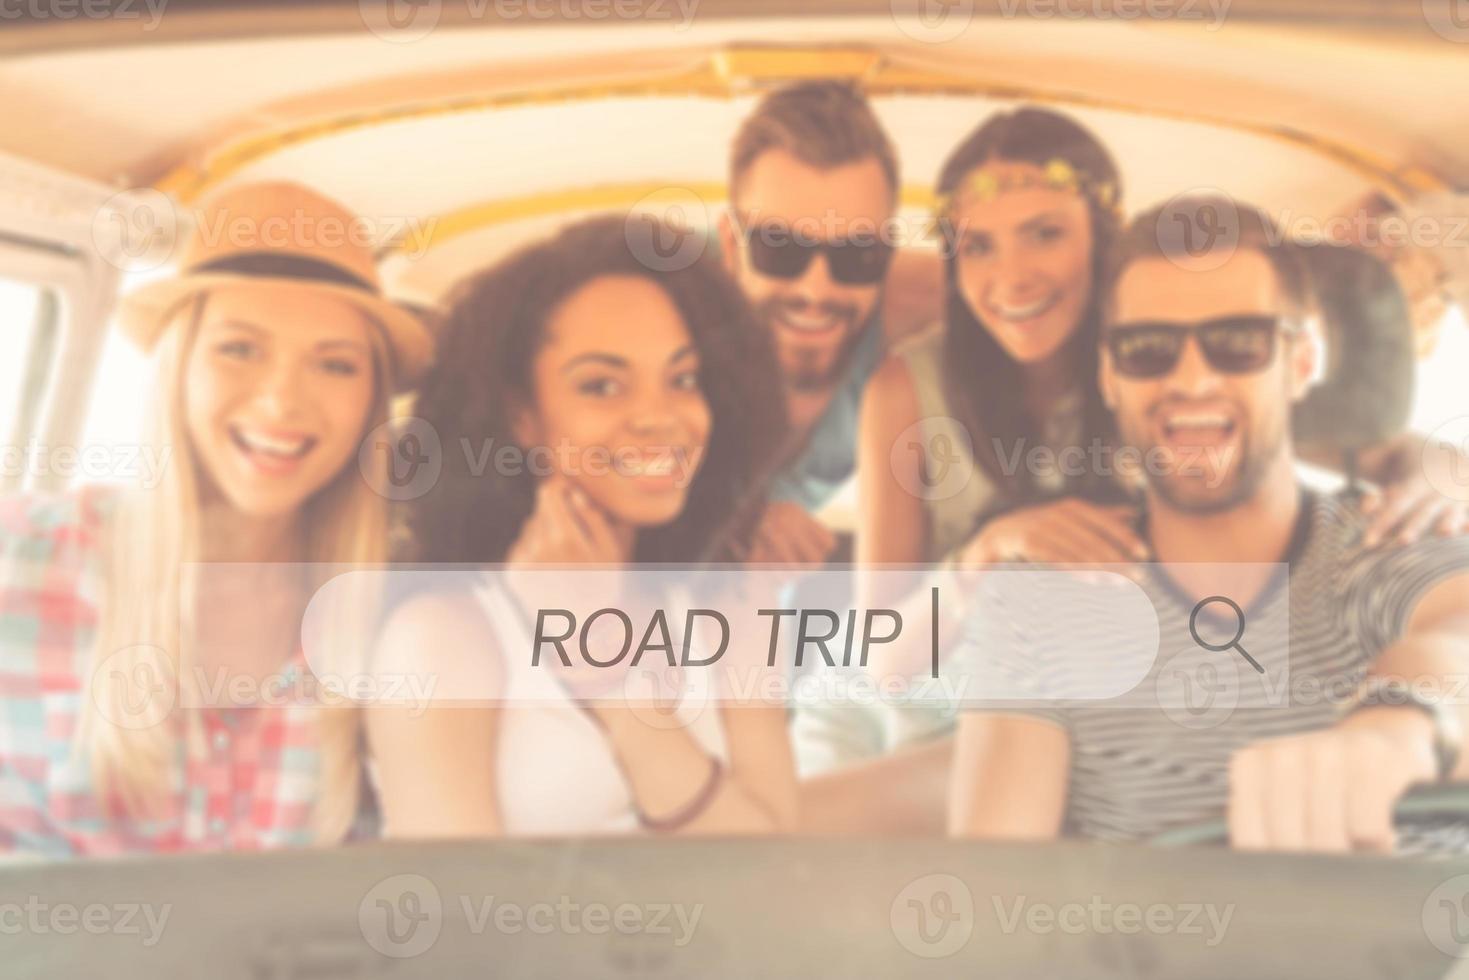 Road trip. Group of joyful young people smiling at camera while sitting inside of minivan together photo